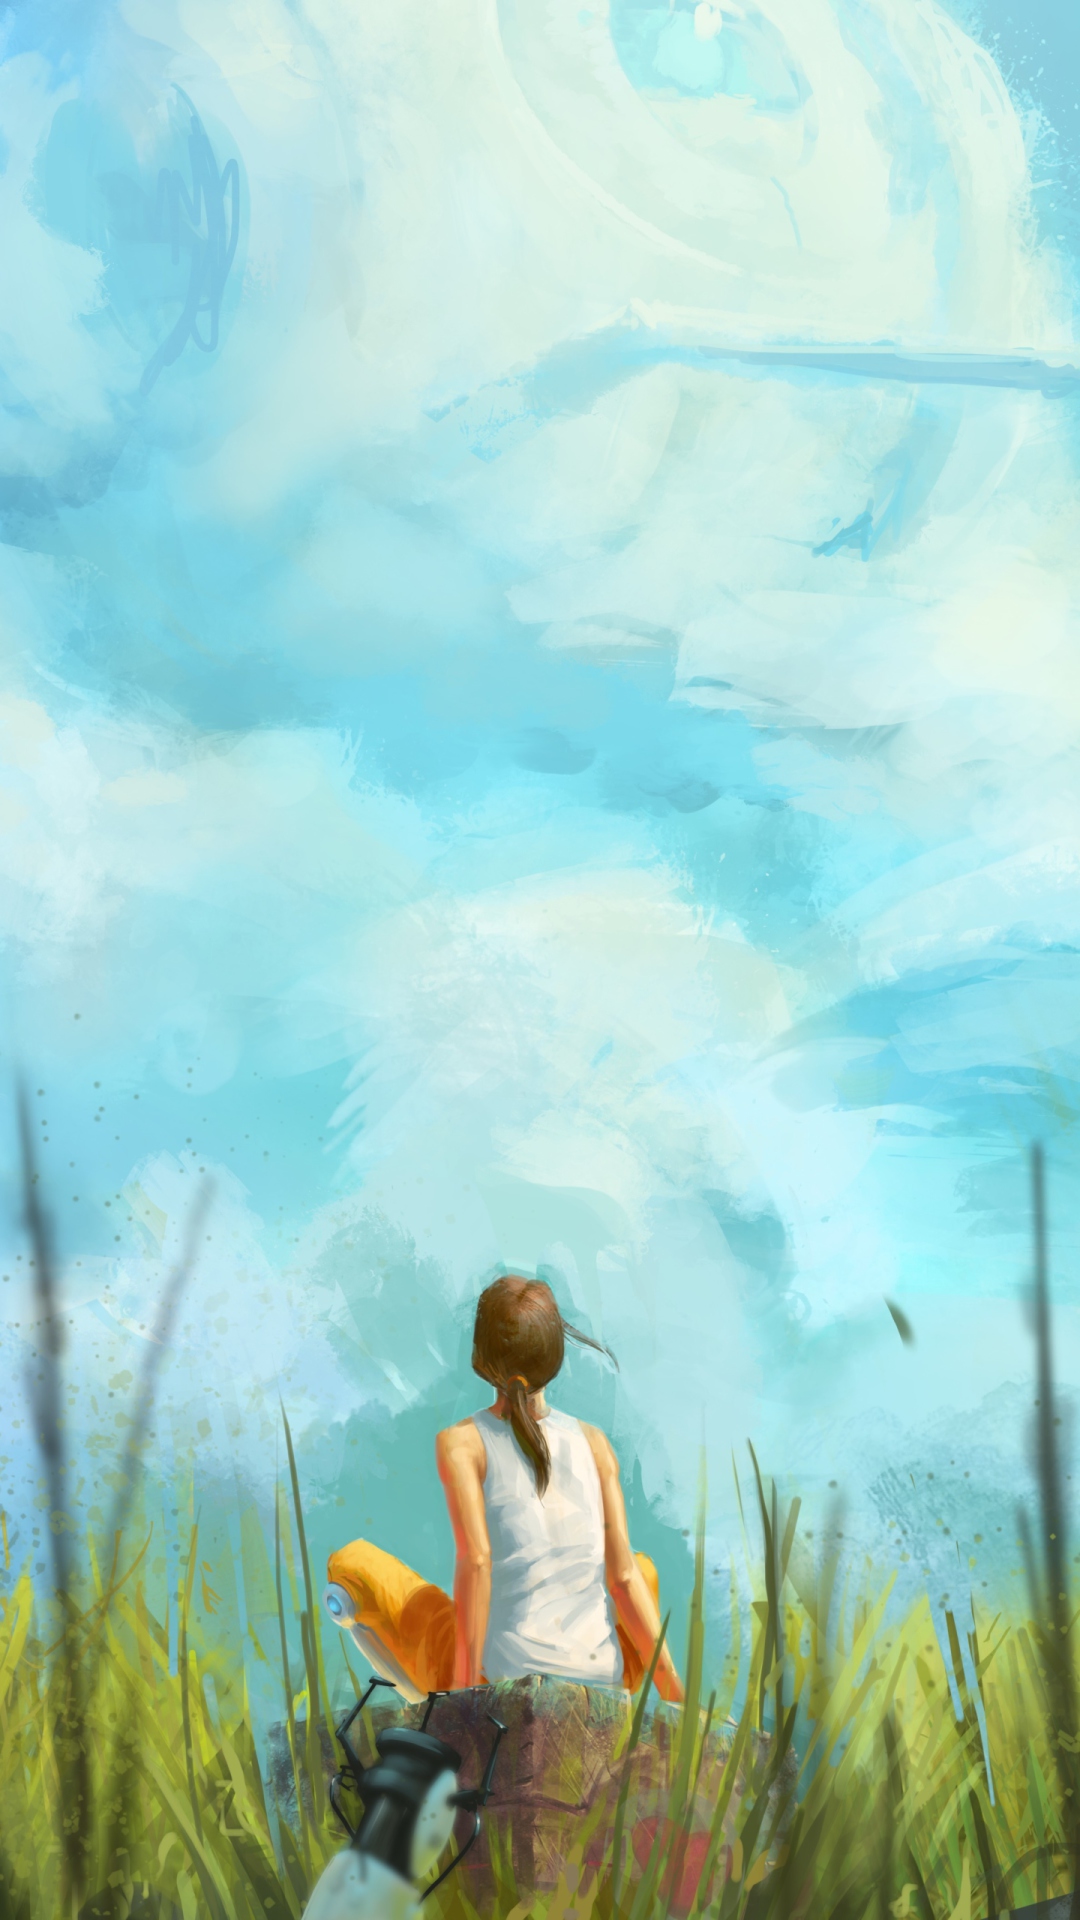 Painting Of Girl, Green Field And Blue Sky screenshot #1 1080x1920